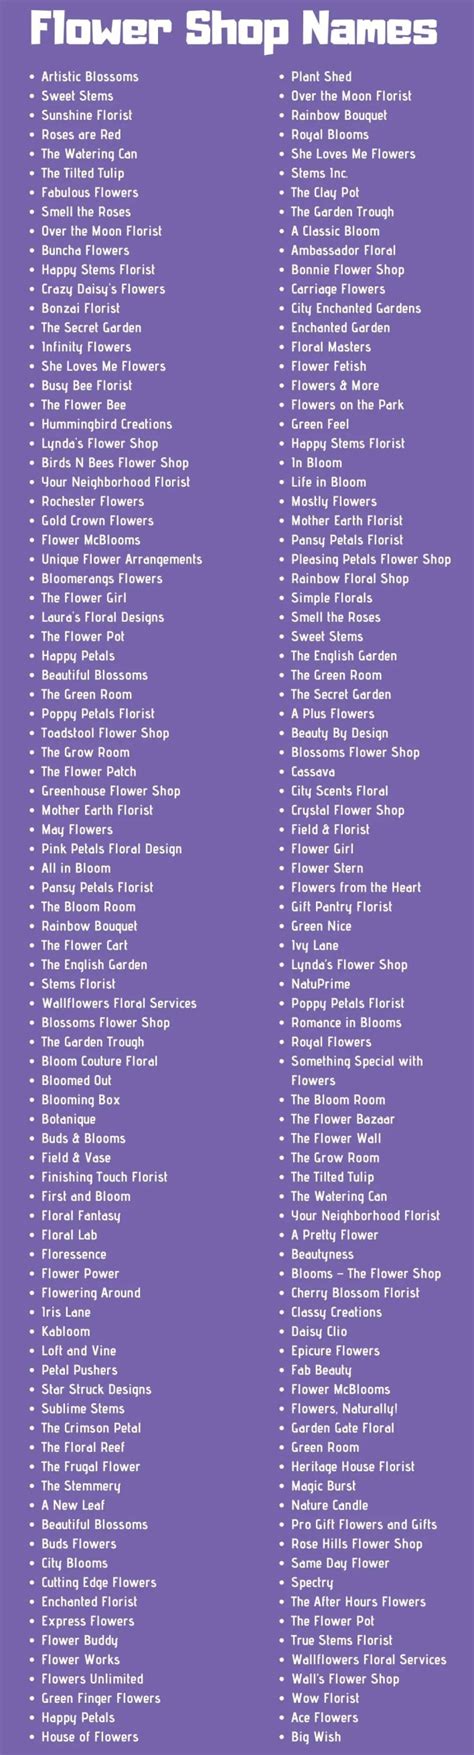 473 Flower Shop Names Ideas And Suggestions